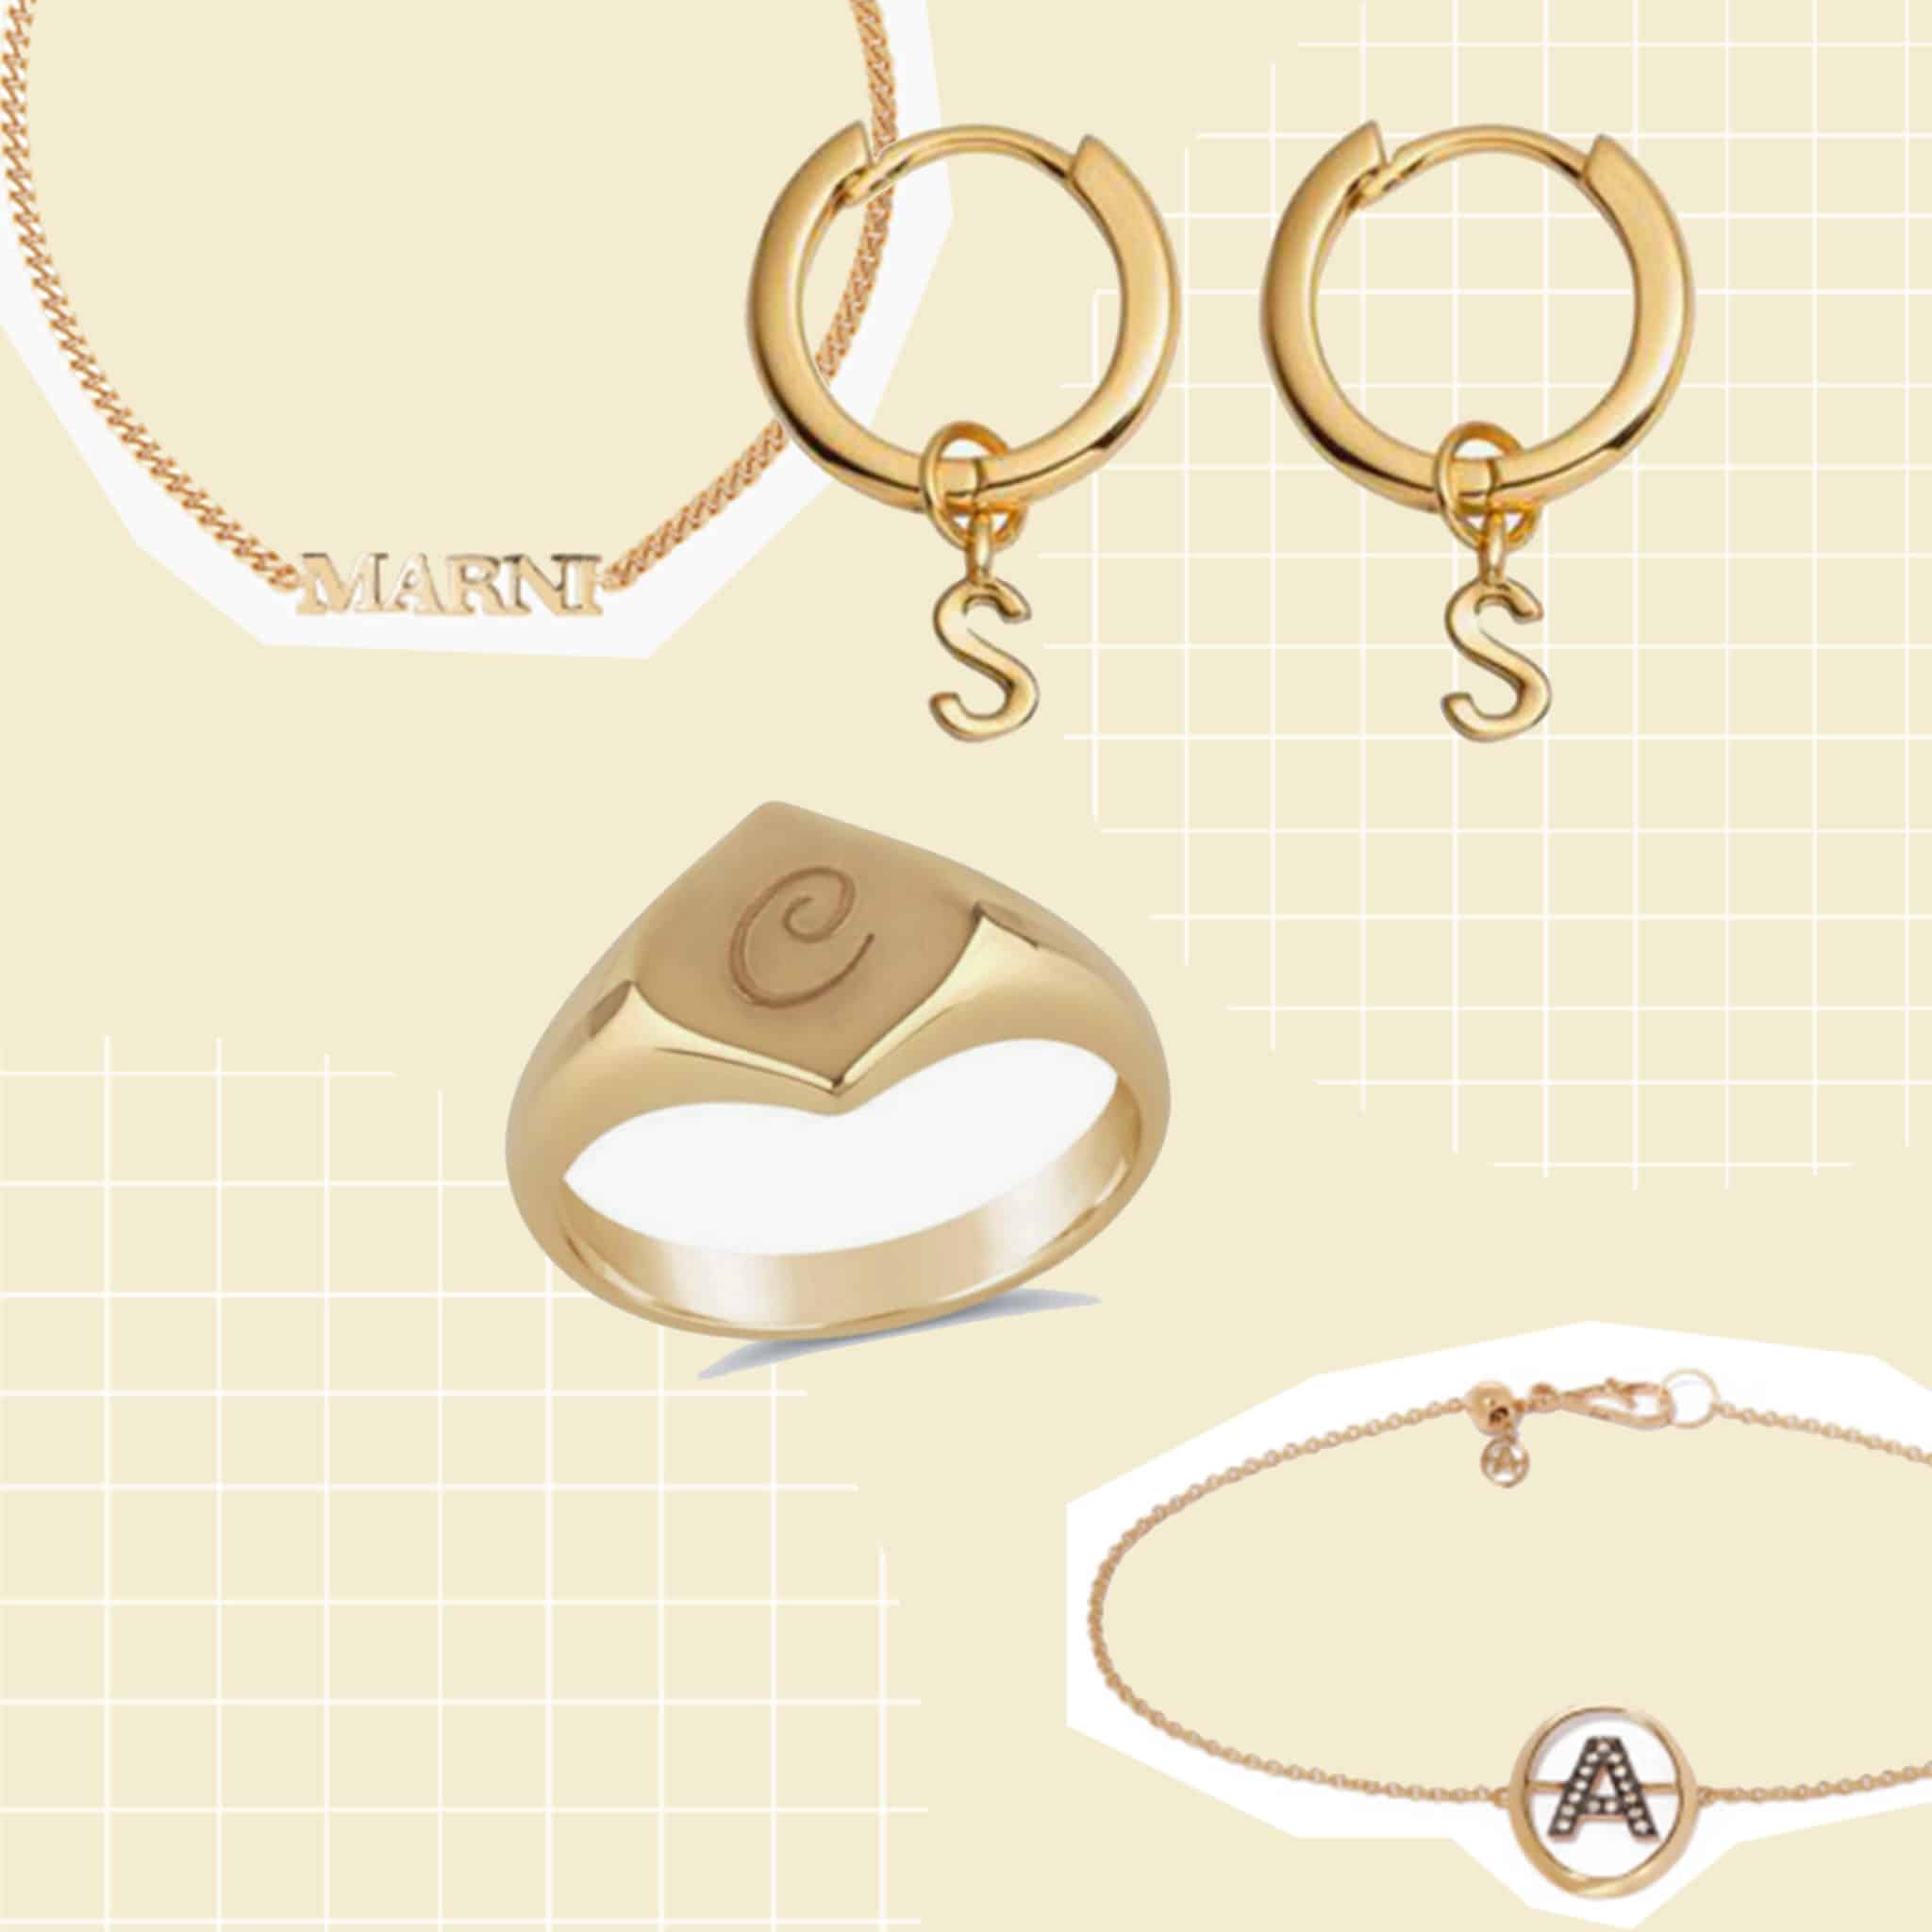 Personalised Jewellery Is The Best Gift For Mum